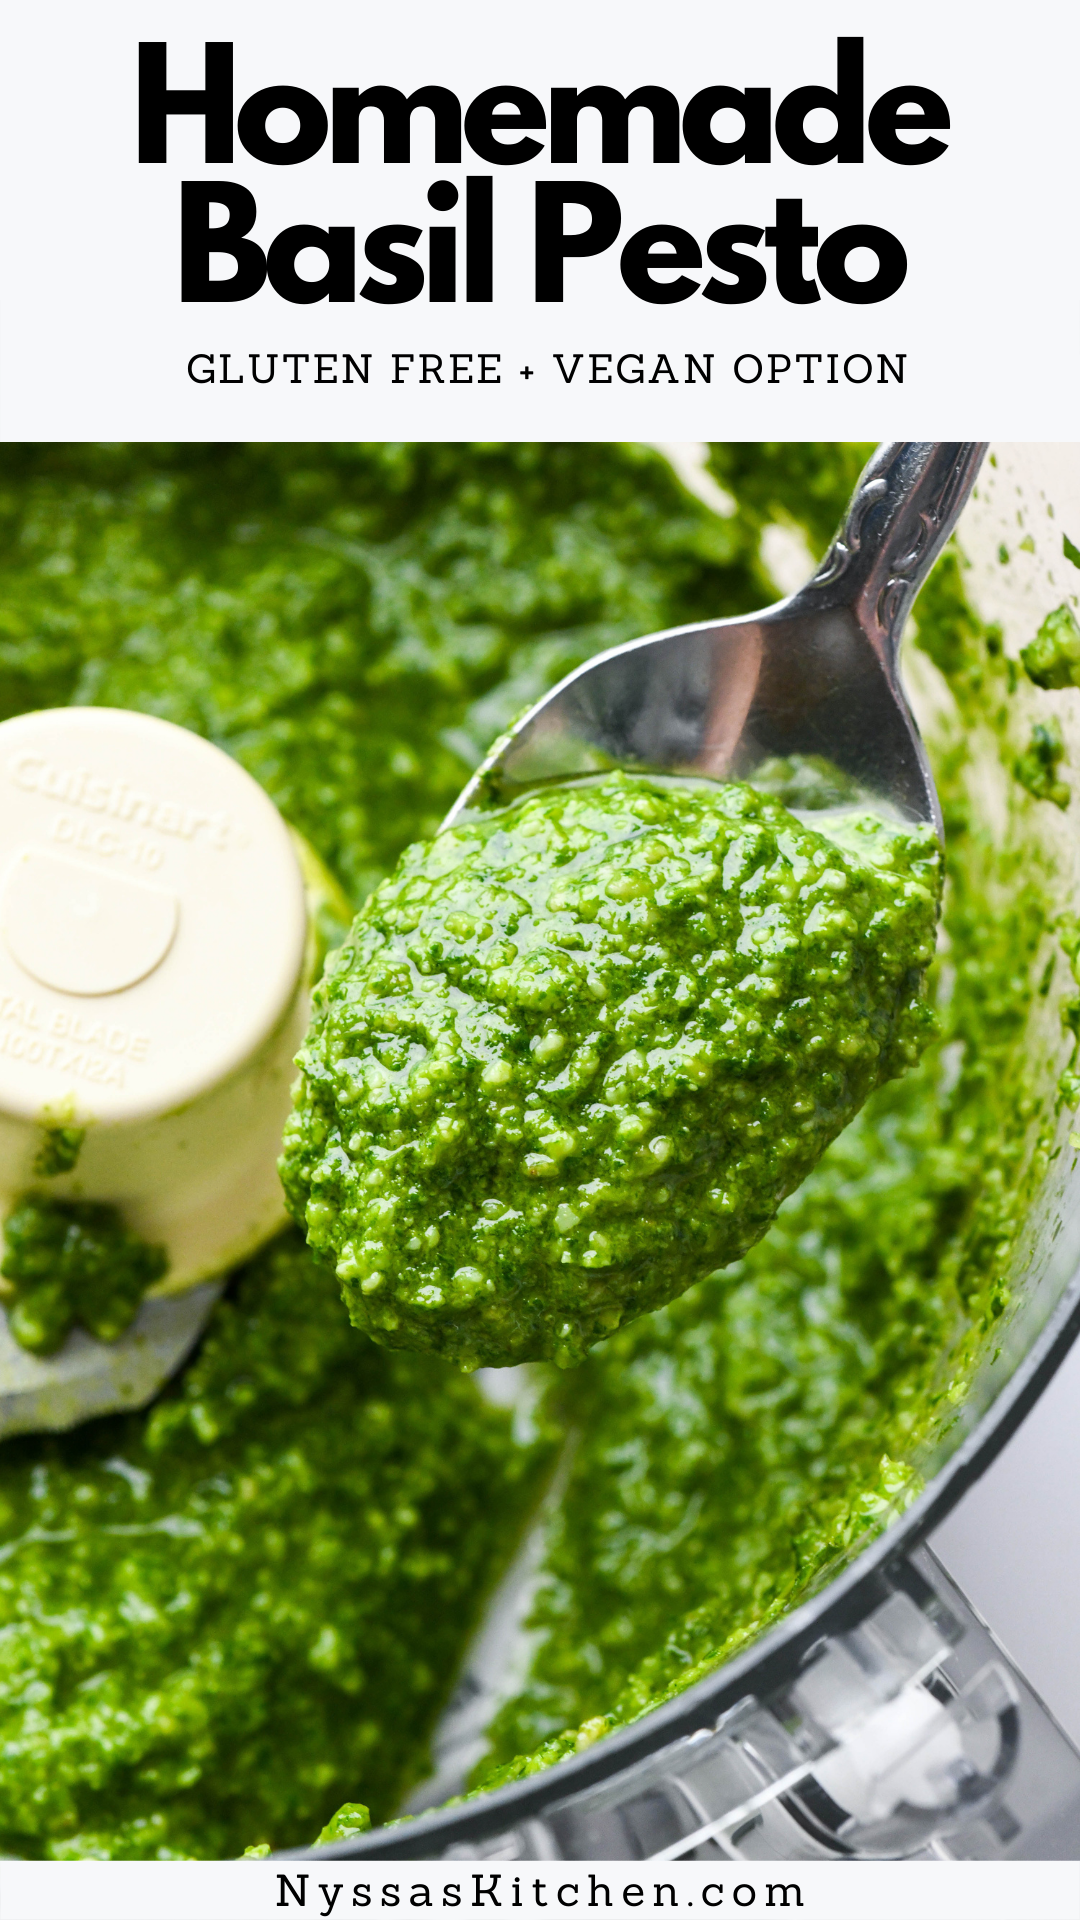 Homemade basil pesto is a versatile and easy to make sauce that tastes so much better than store bought! It's creamy, bursting with fresh flavors, and ready in less than 5 minutes. Perfect for everything from pesto pasta, to sandwiches, on pizza, with roasted veggies, in salads, to your favorite grilled protein. Gluten free, vegan / dairy free / paleo / Whole30 option.